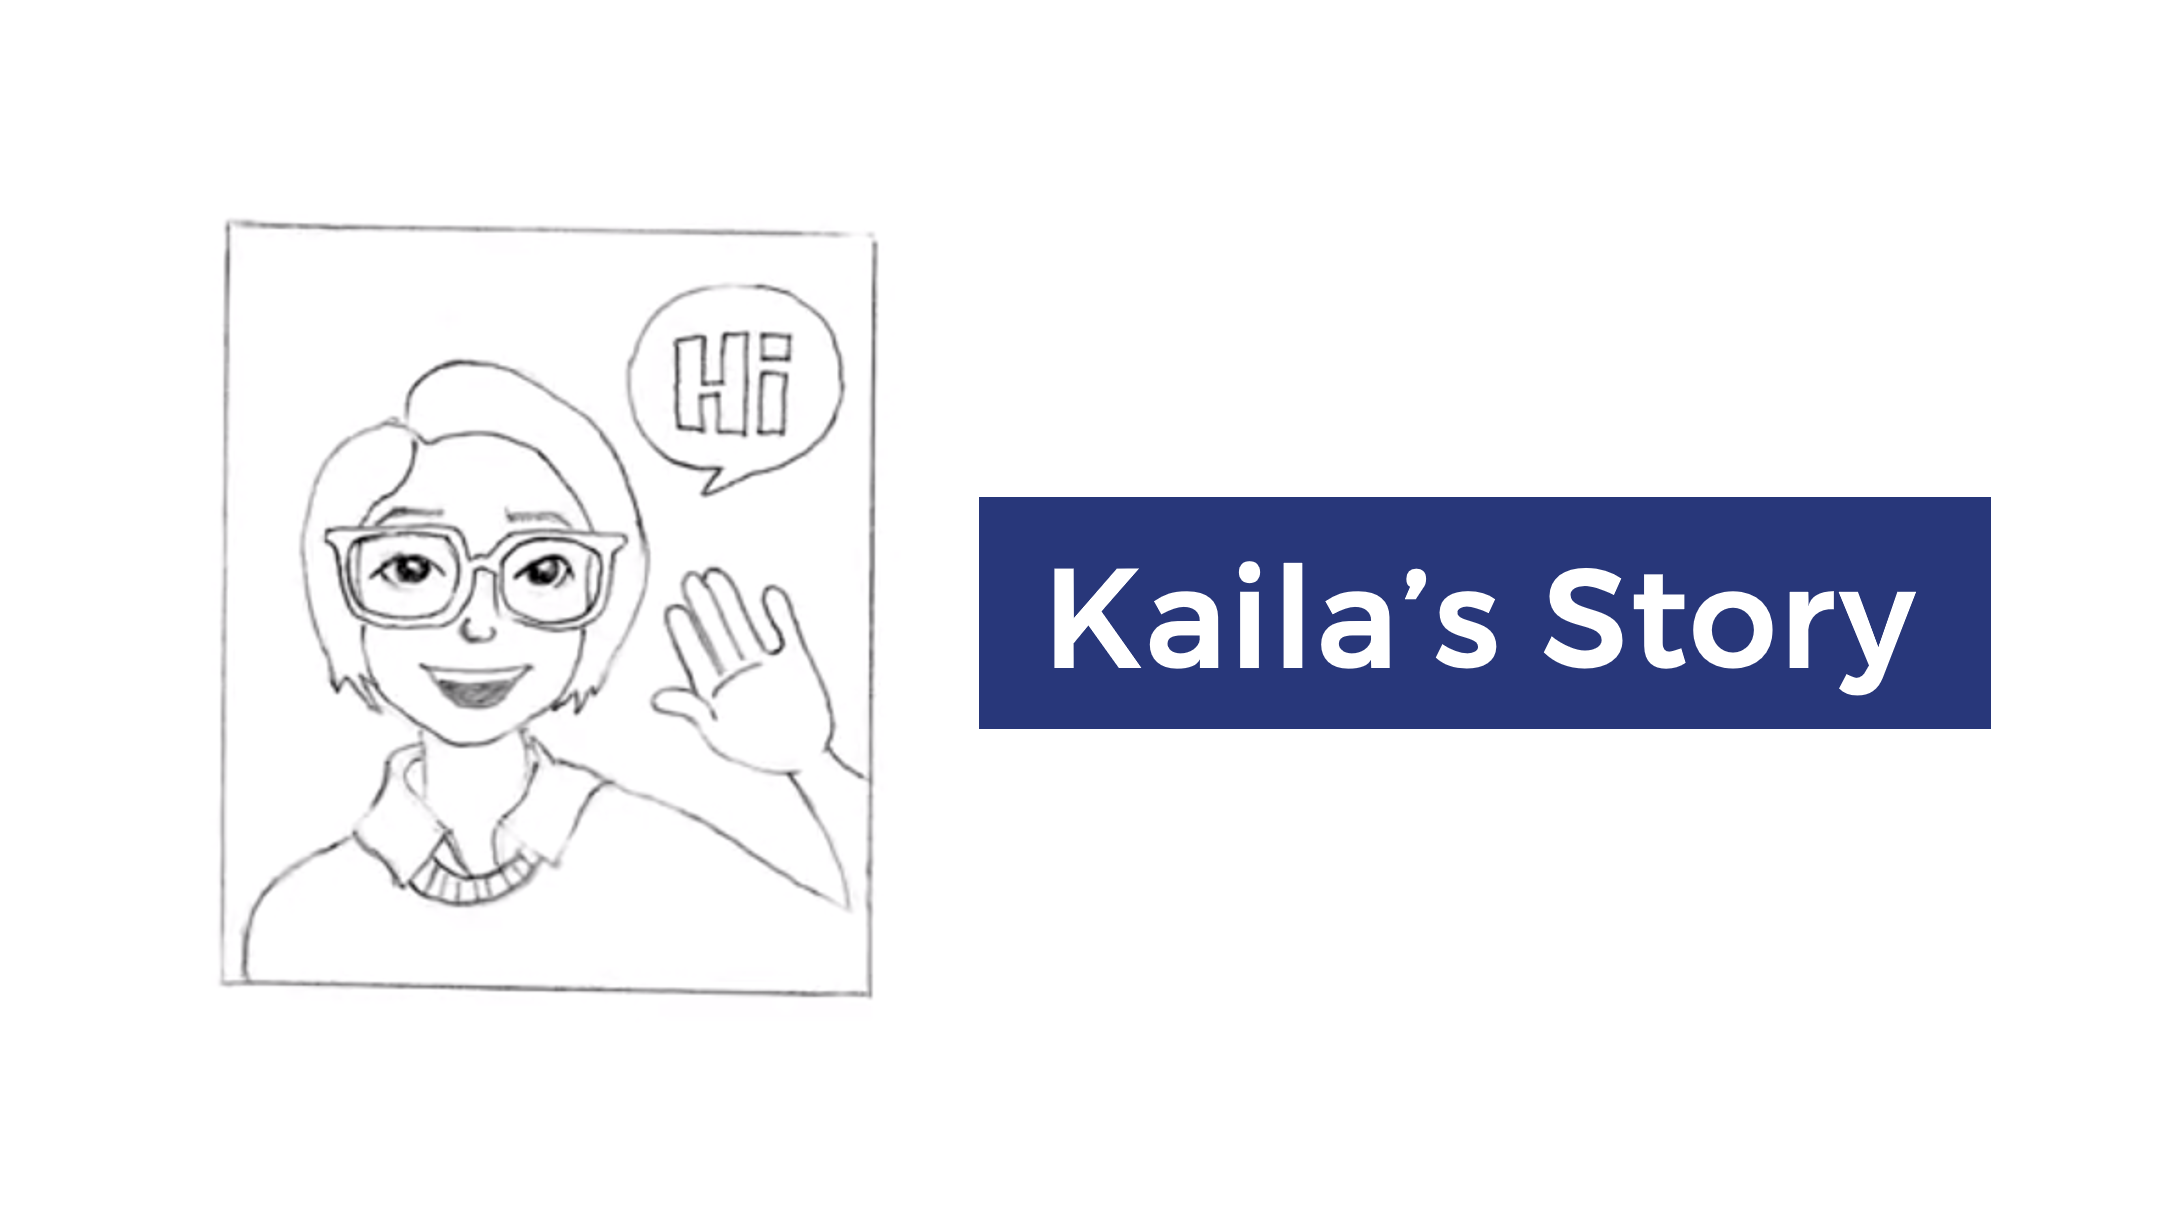 Thumbnail for Kaila's Story video. A white image with a drawing on the left and text on the right. The pencil drawing has a square with a person from the shoulder up, waving and saying, "Hi". They have glasses and short hair past their ears. On the right is white text in a dark blue rectangle: "Kaila's Story".